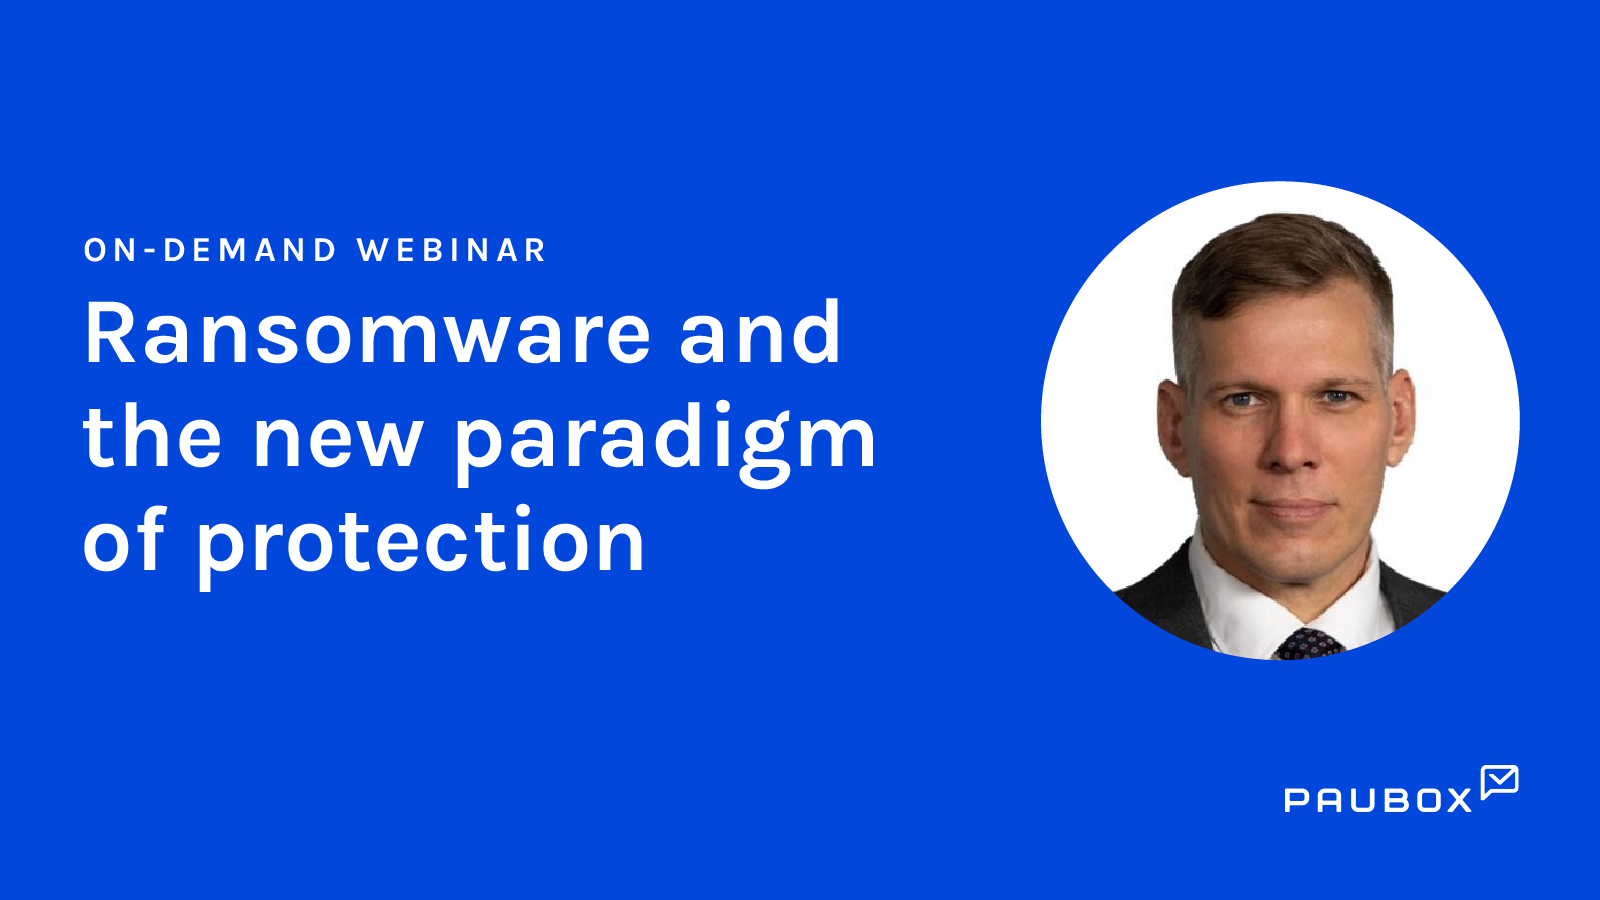 Ransomware and the new paradigm of protection